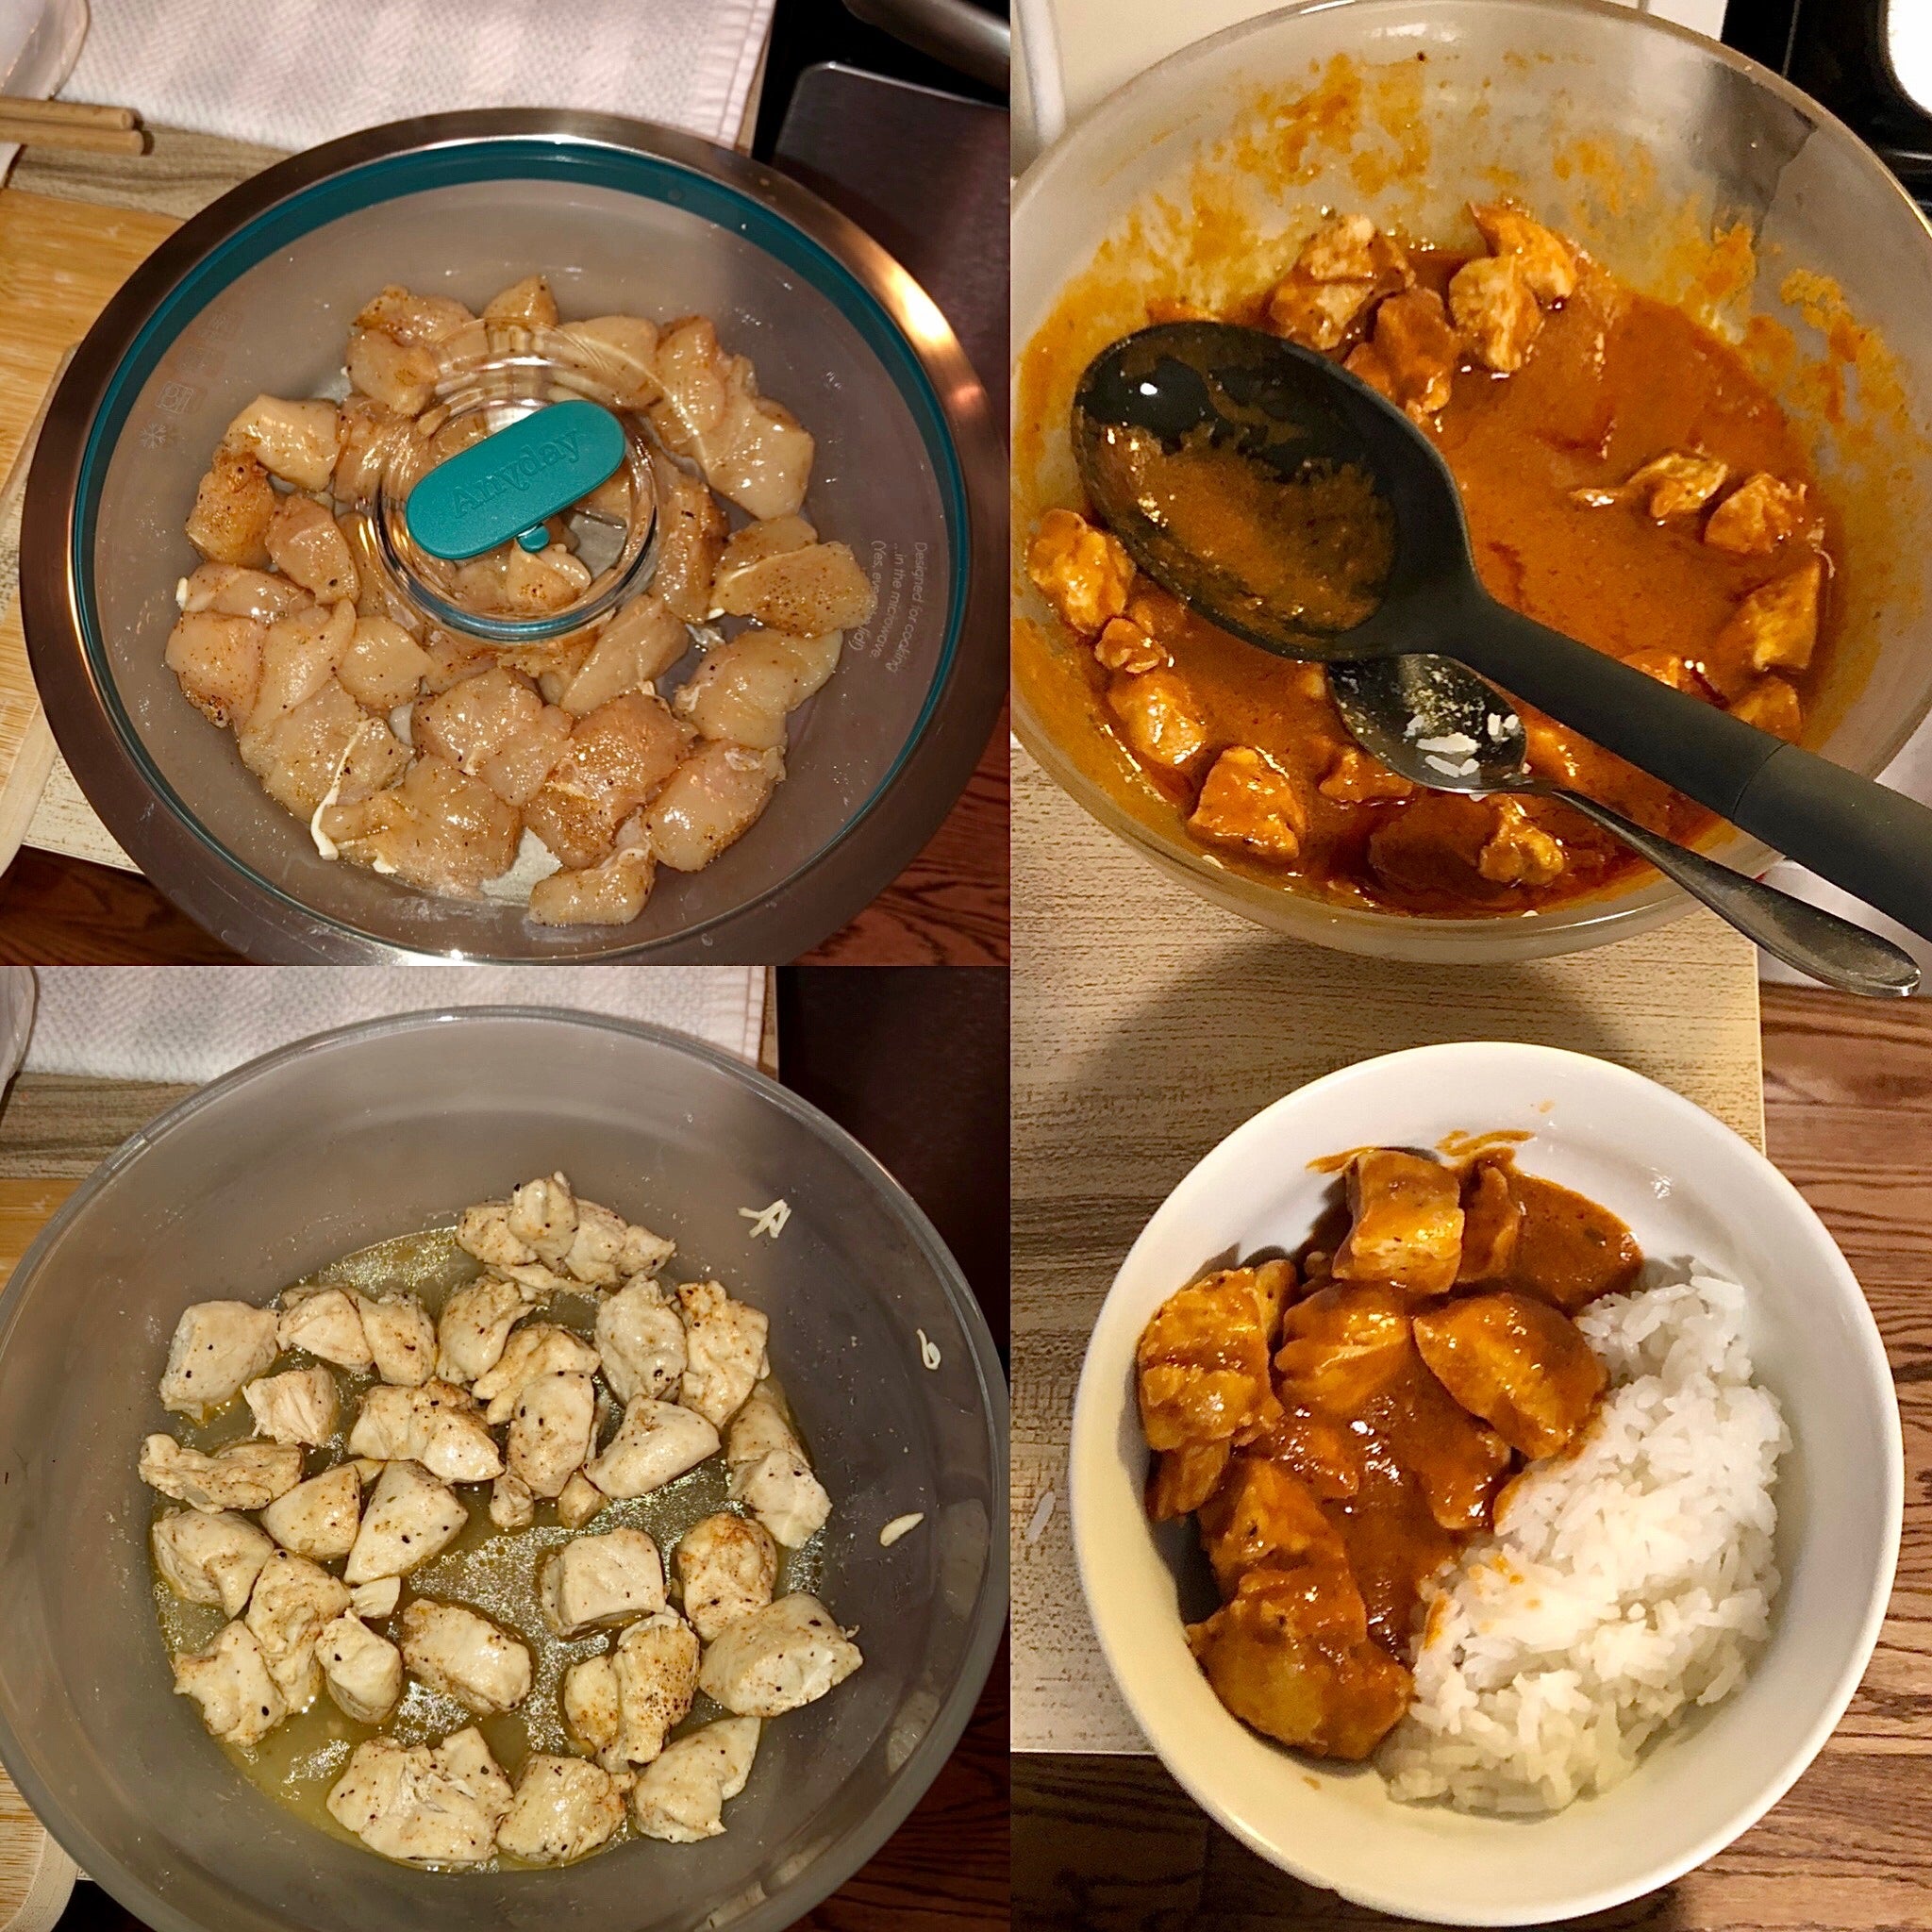 Anyday Cookware Review: Delicious, homemade cooking in the microwave -  Reviewed